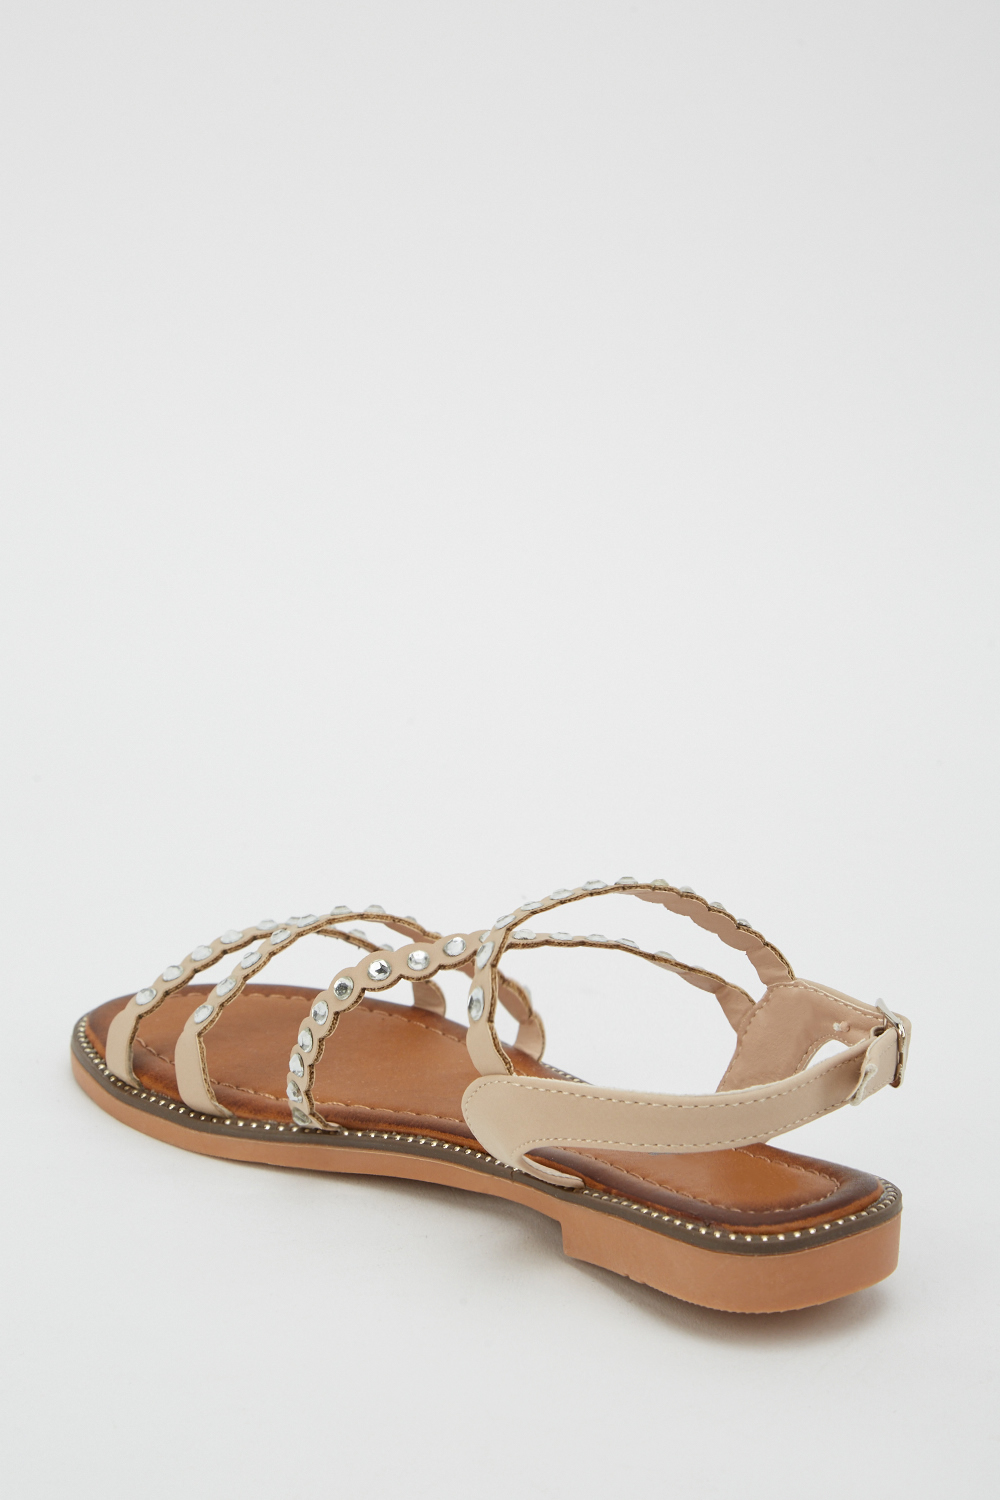 Encrusted Strappy Flat Sandals - Just $6